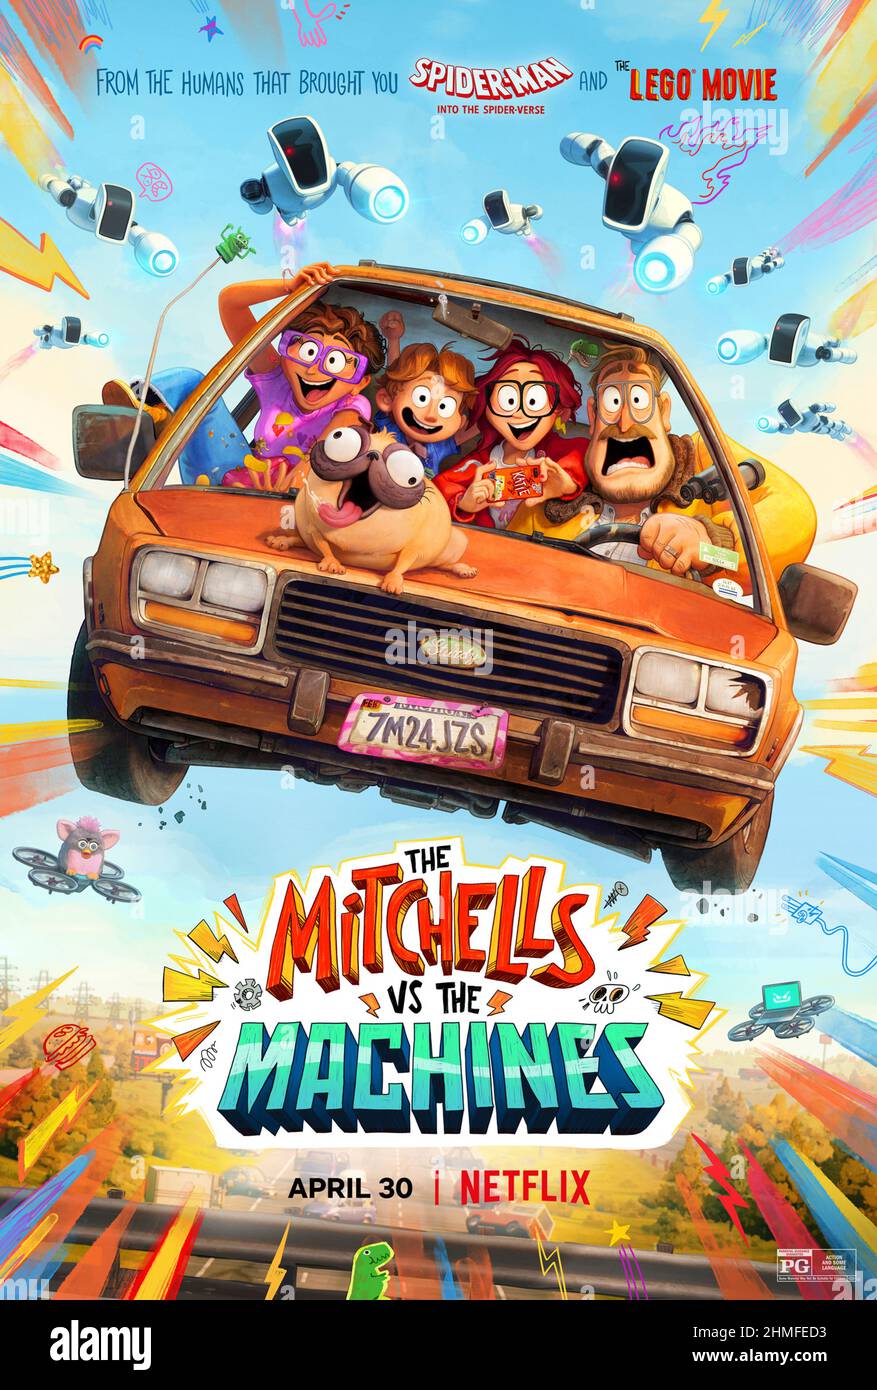 The Mitchells vs the Machines (2021) directed by Michael Rianda and Jeff Rowe and starring Abbi Jacobson, Danny McBride and Maya Rudolph. A quirky, dysfunctional family's road trip is upended when they find themselves in the middle of the robot apocalypse and suddenly become humanity's unlikeliest last hope. Stock Photo